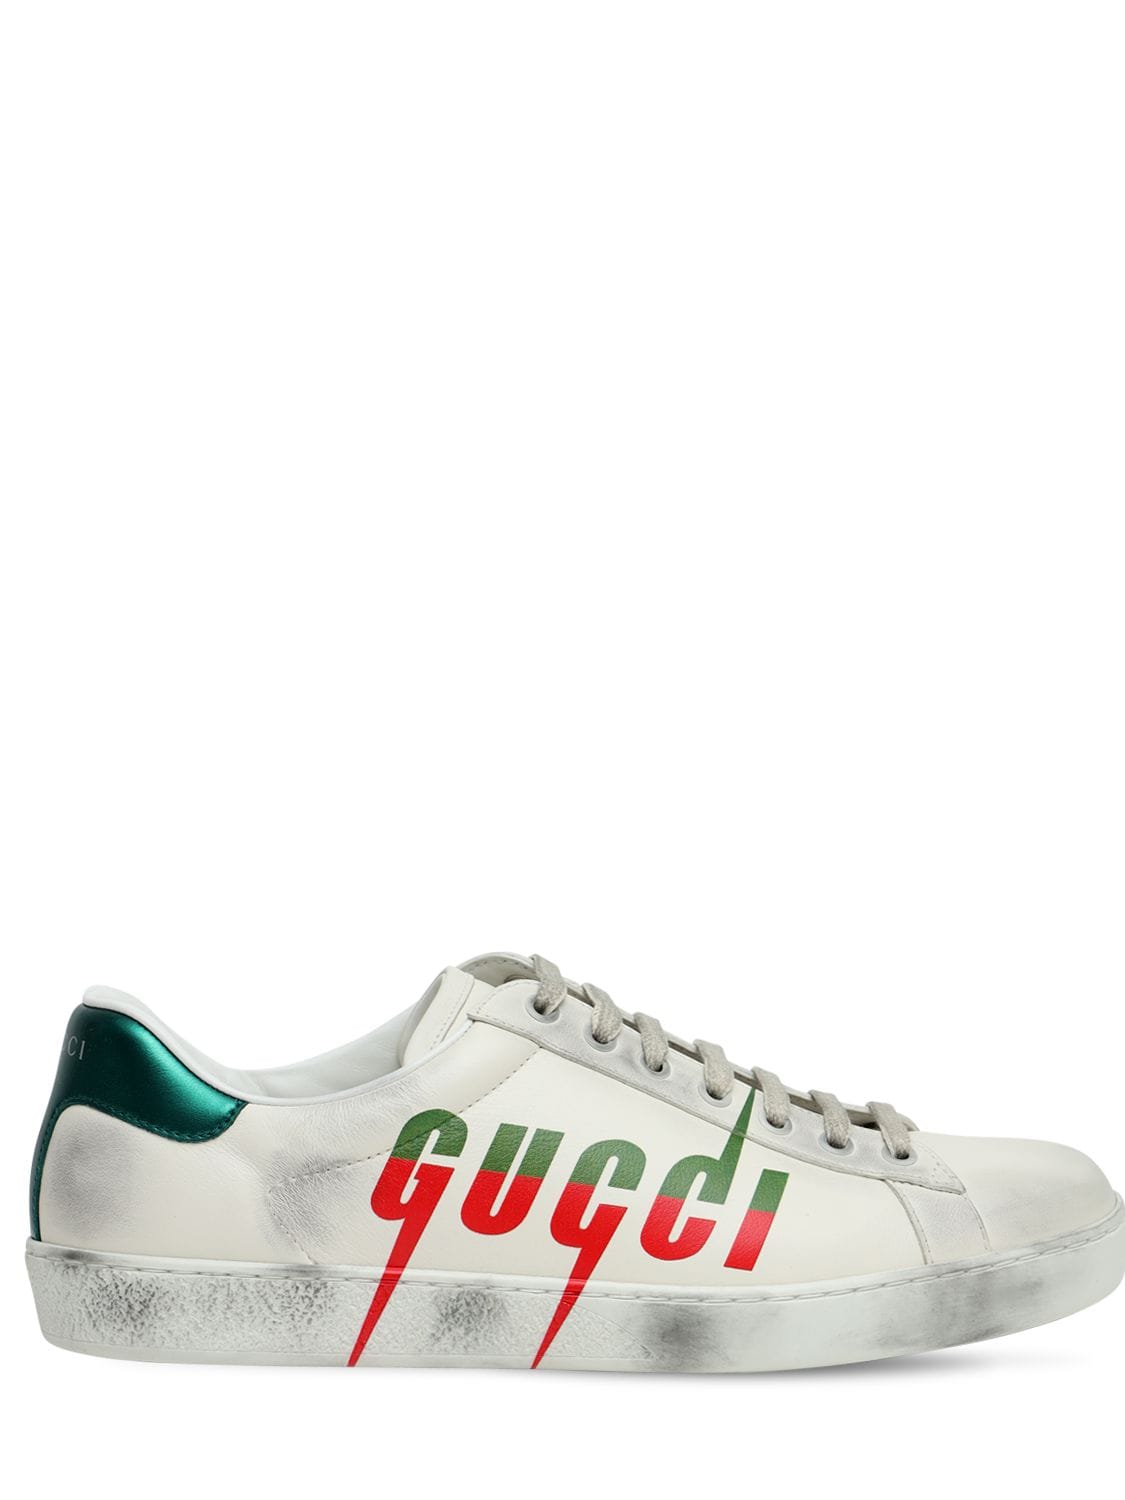 gucci ace sneakers discount